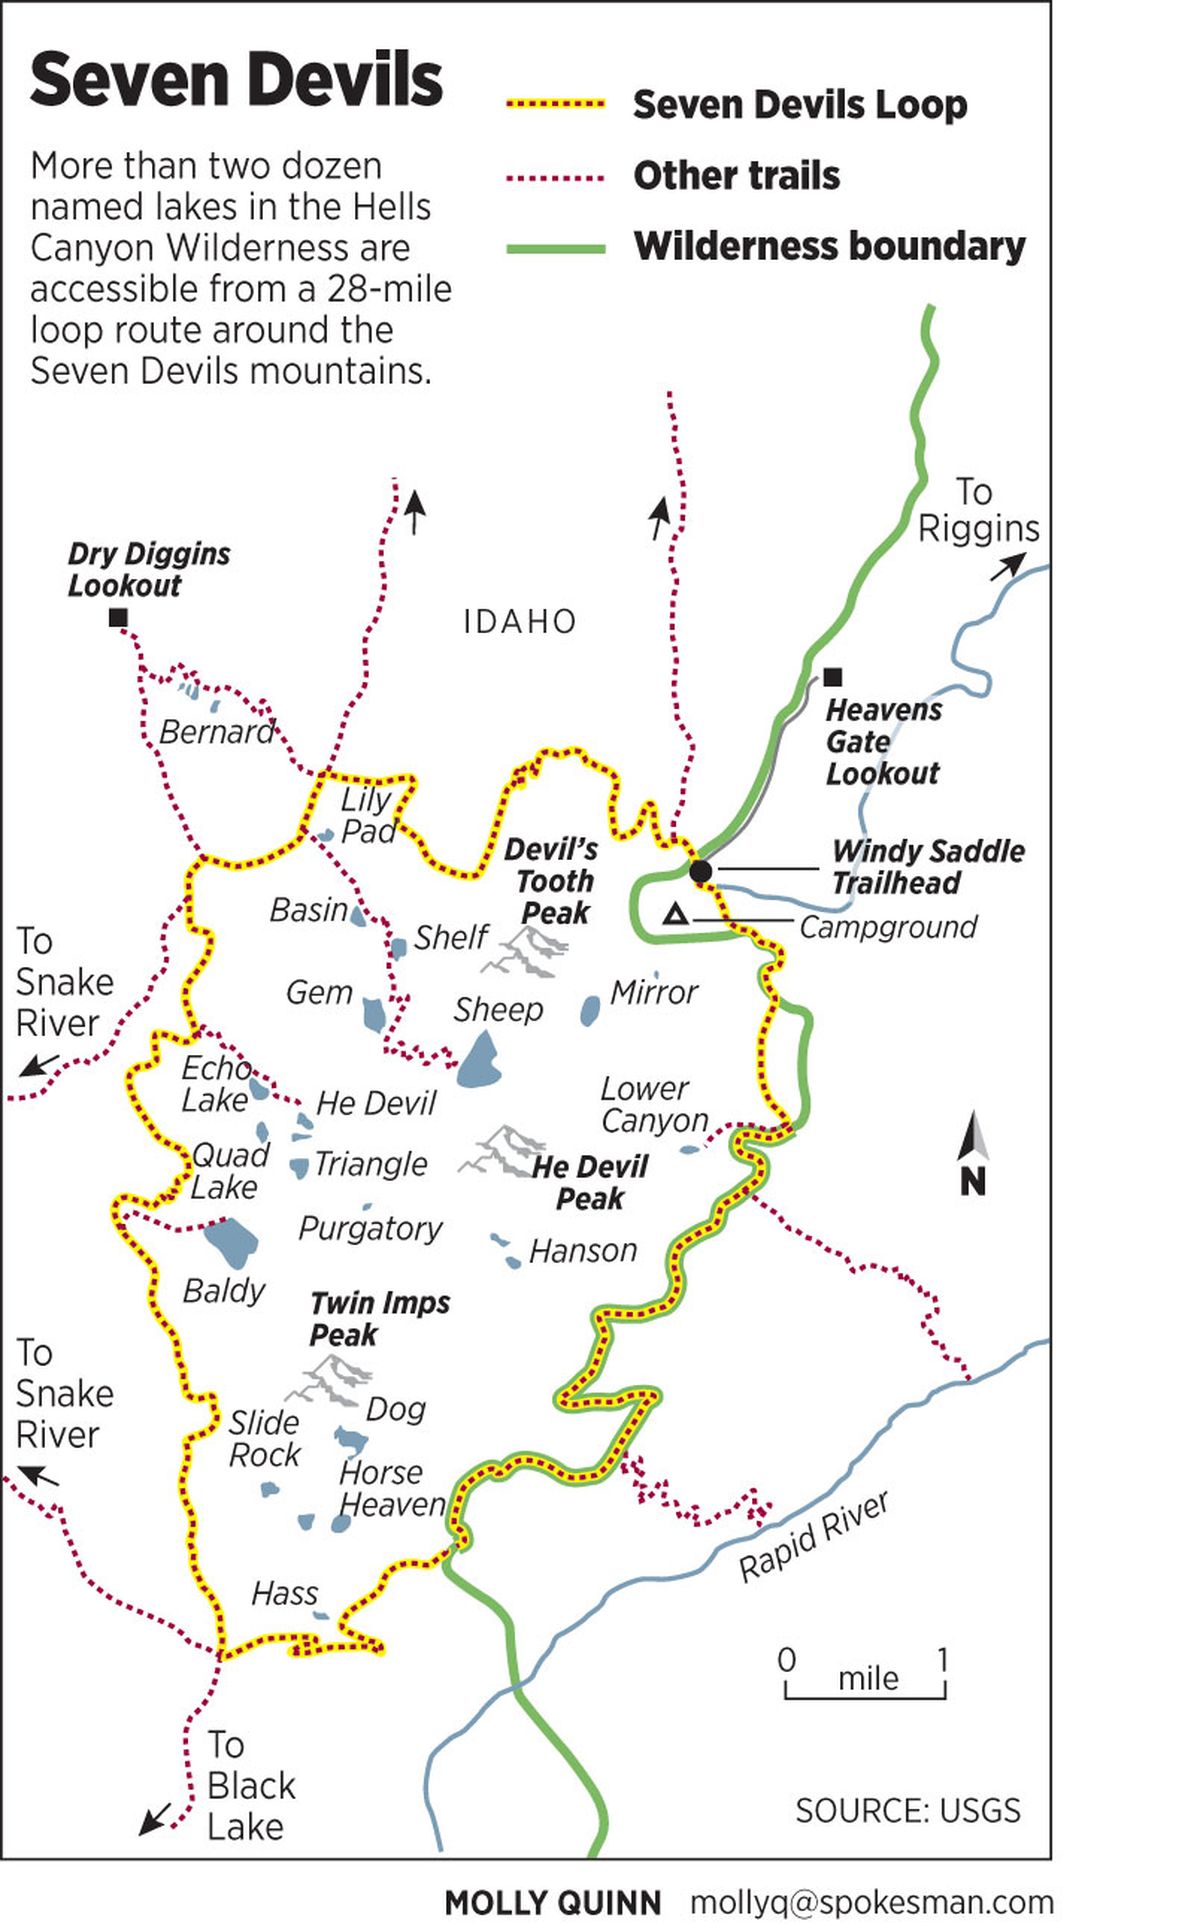 Map shows main trails running through the core of the Seven Devils Mountains in the Hells Canyon Wilderness west of Riggins, Idaho.